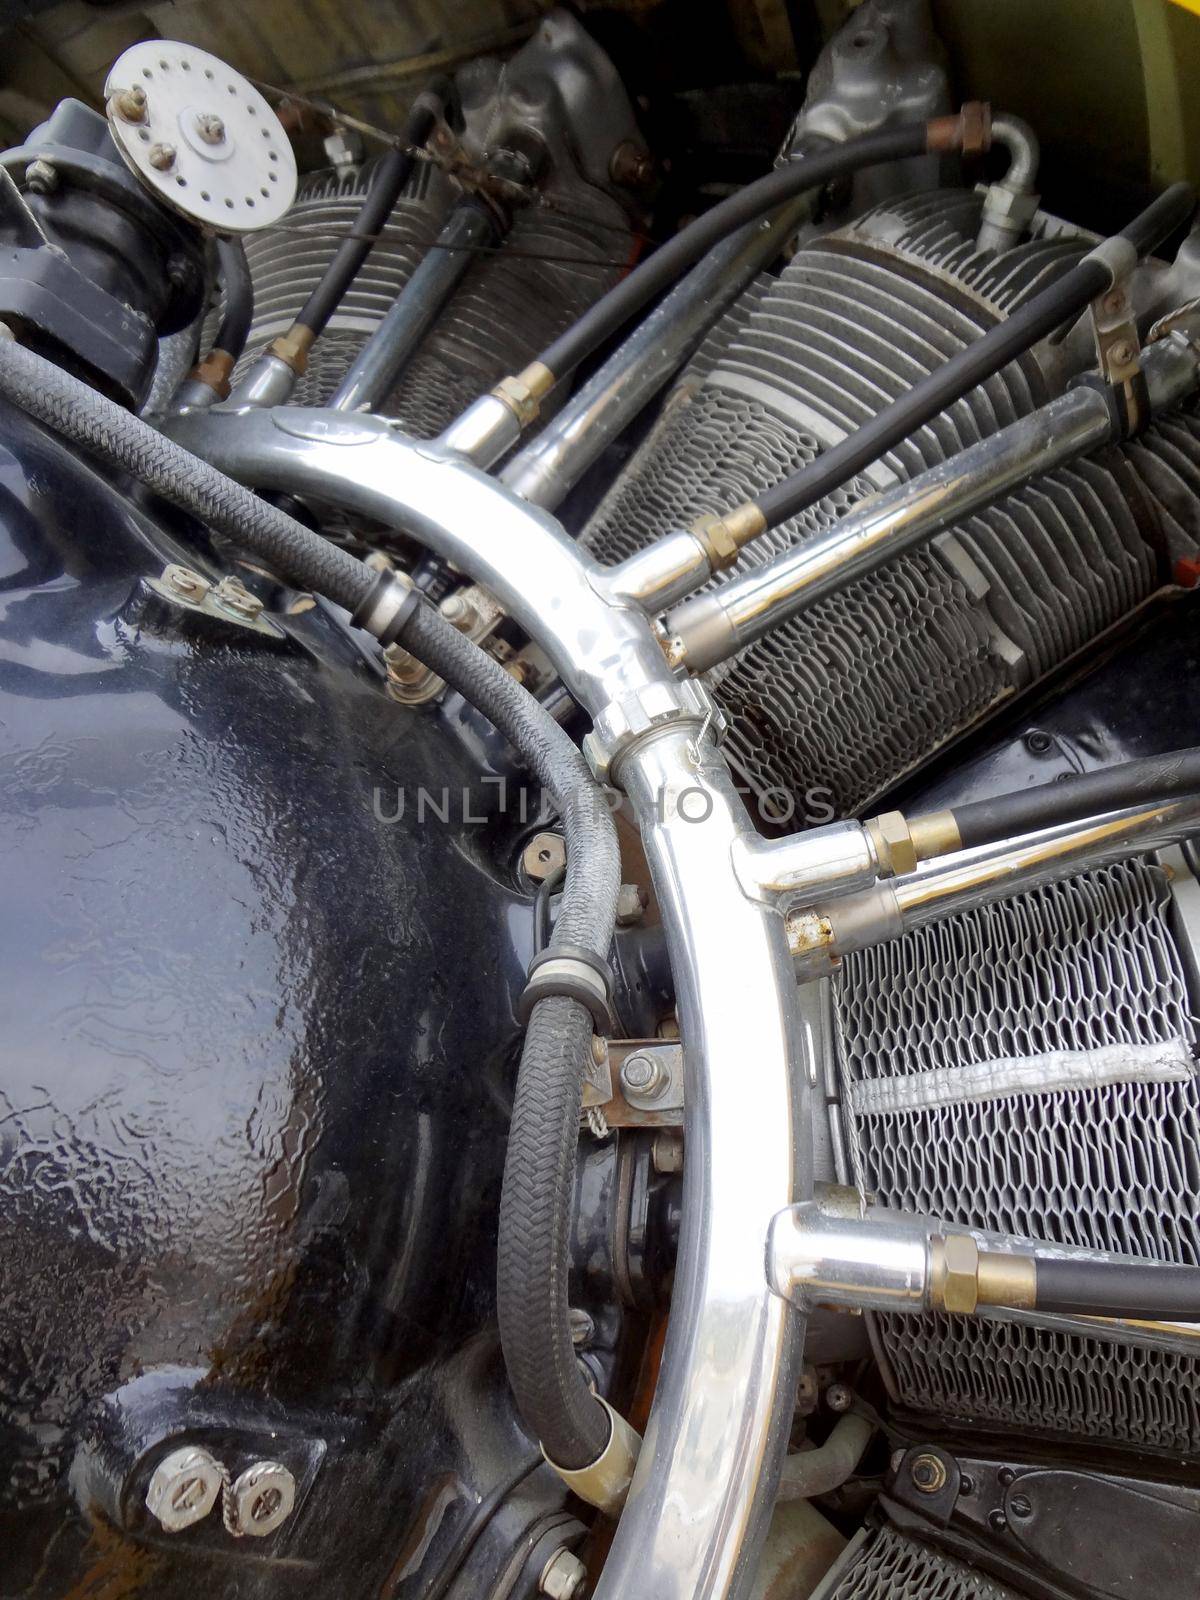 Close up of turbine of a propeller engine by EricGBVD